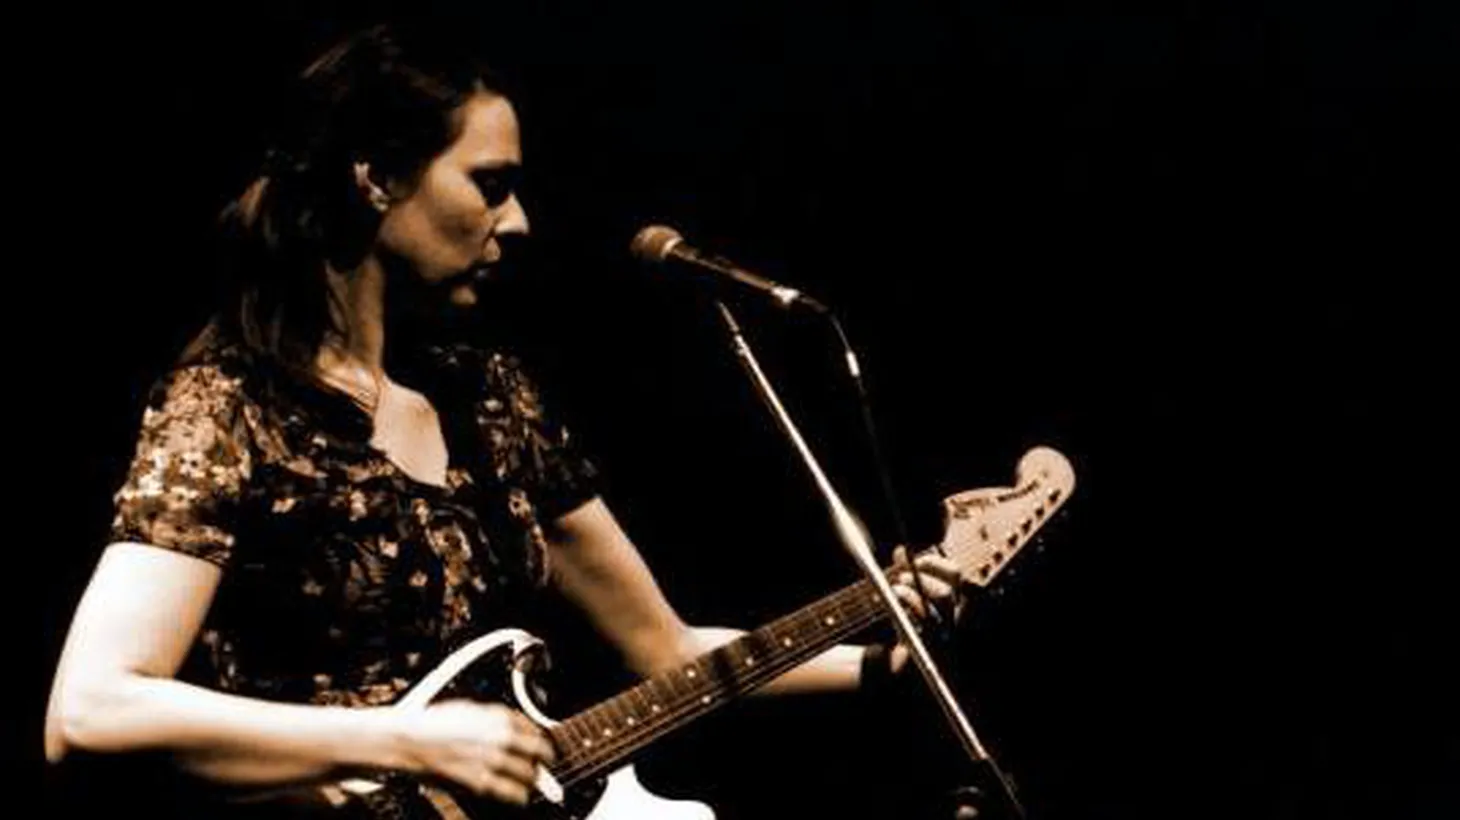 Beloved pop band Stereolab ended their run in 2009, but front-woman Laetitia Sadier continues to release notable music as a solo artist.